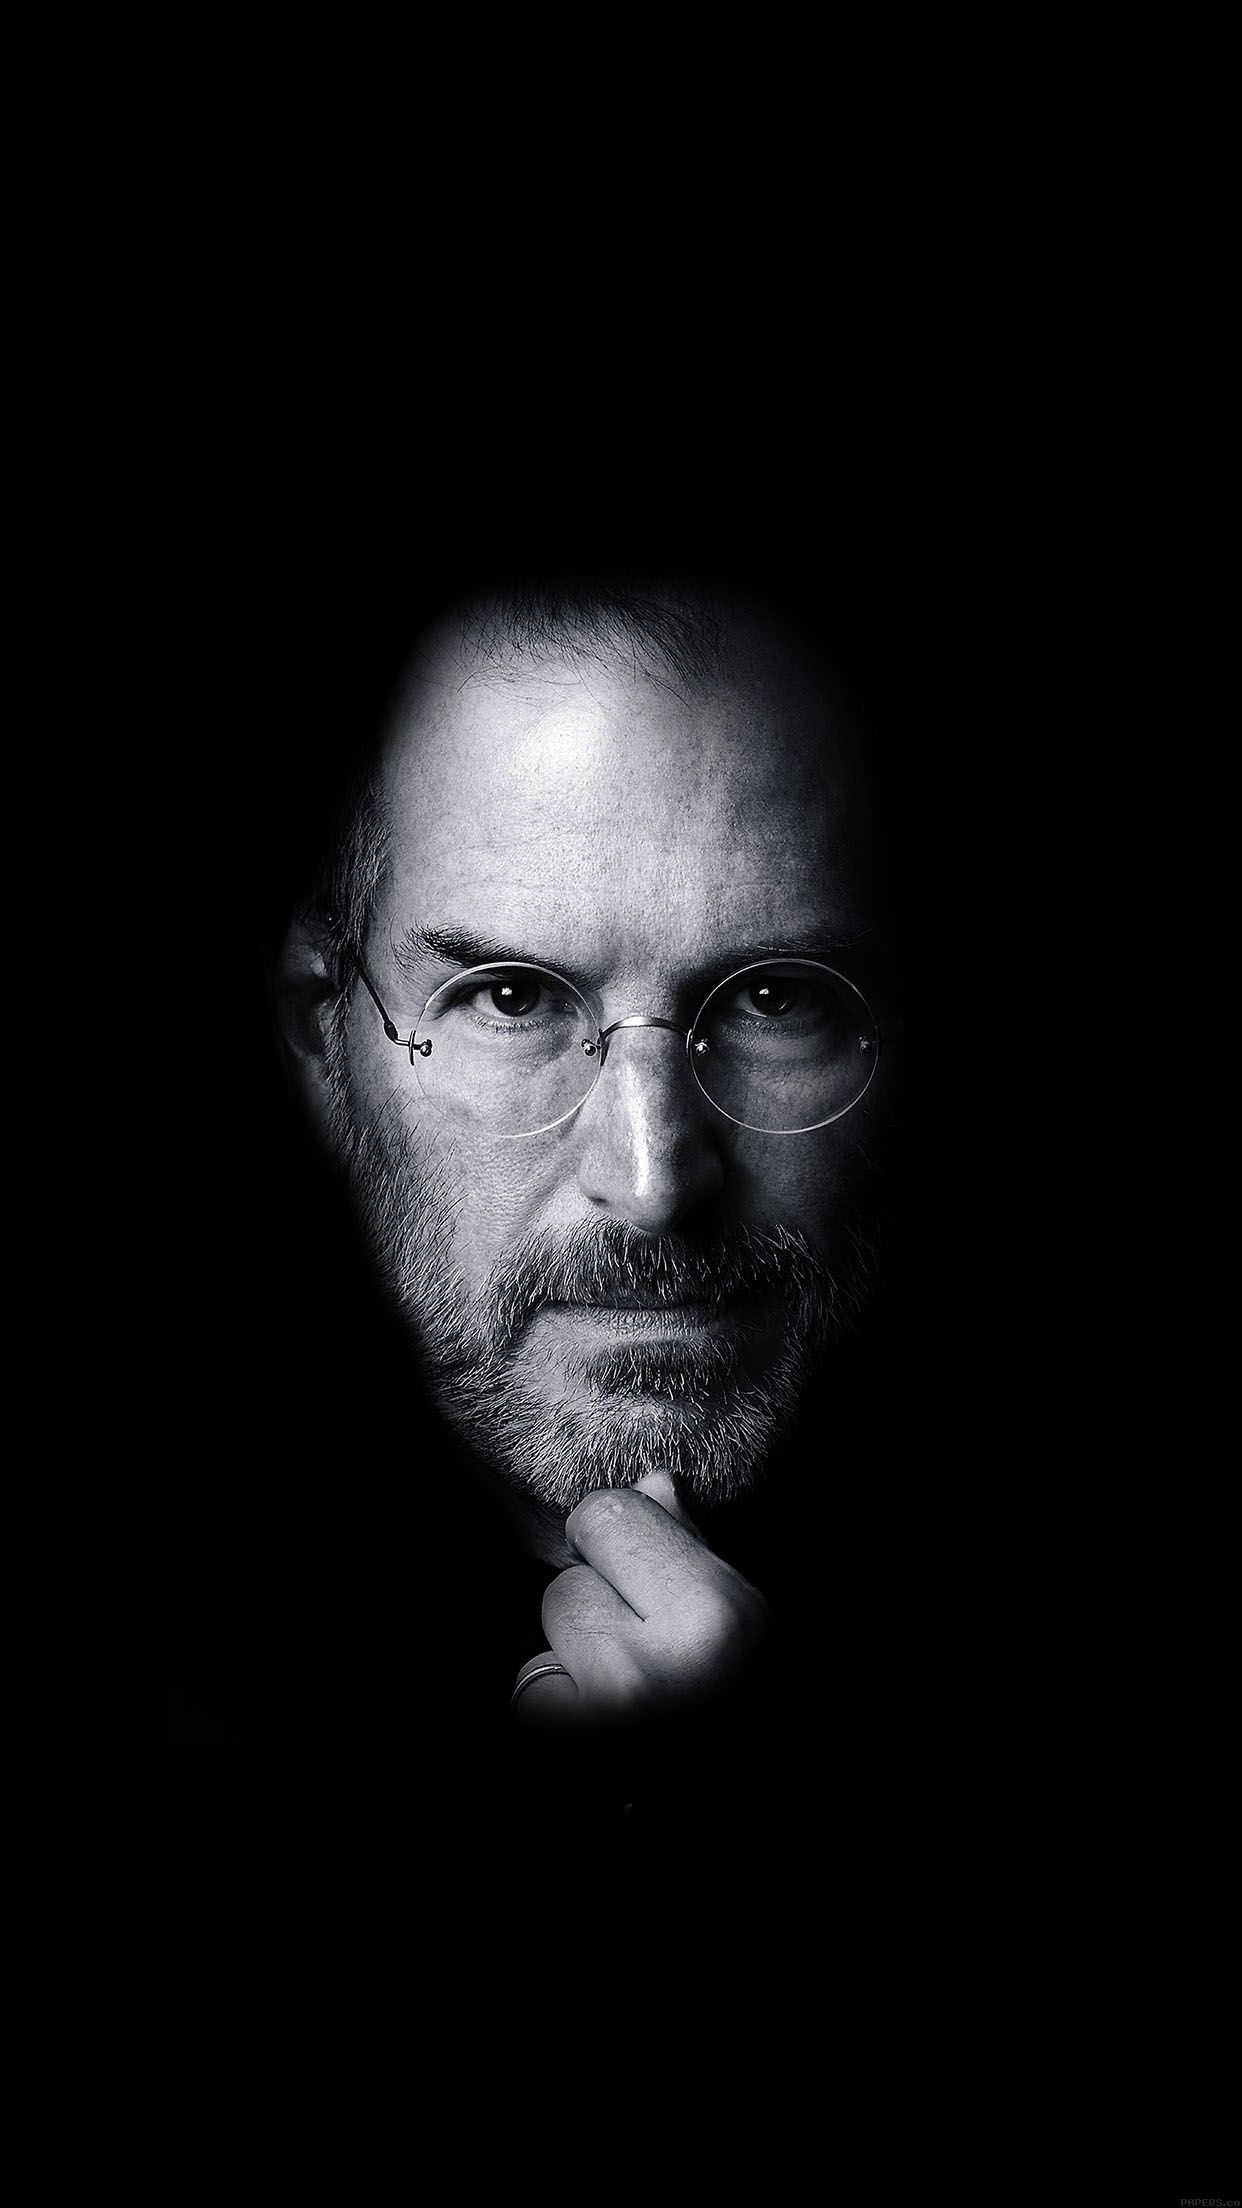 Steve Jobs tribute wallpapers for iPhone 6 and iPhone 6 Plus